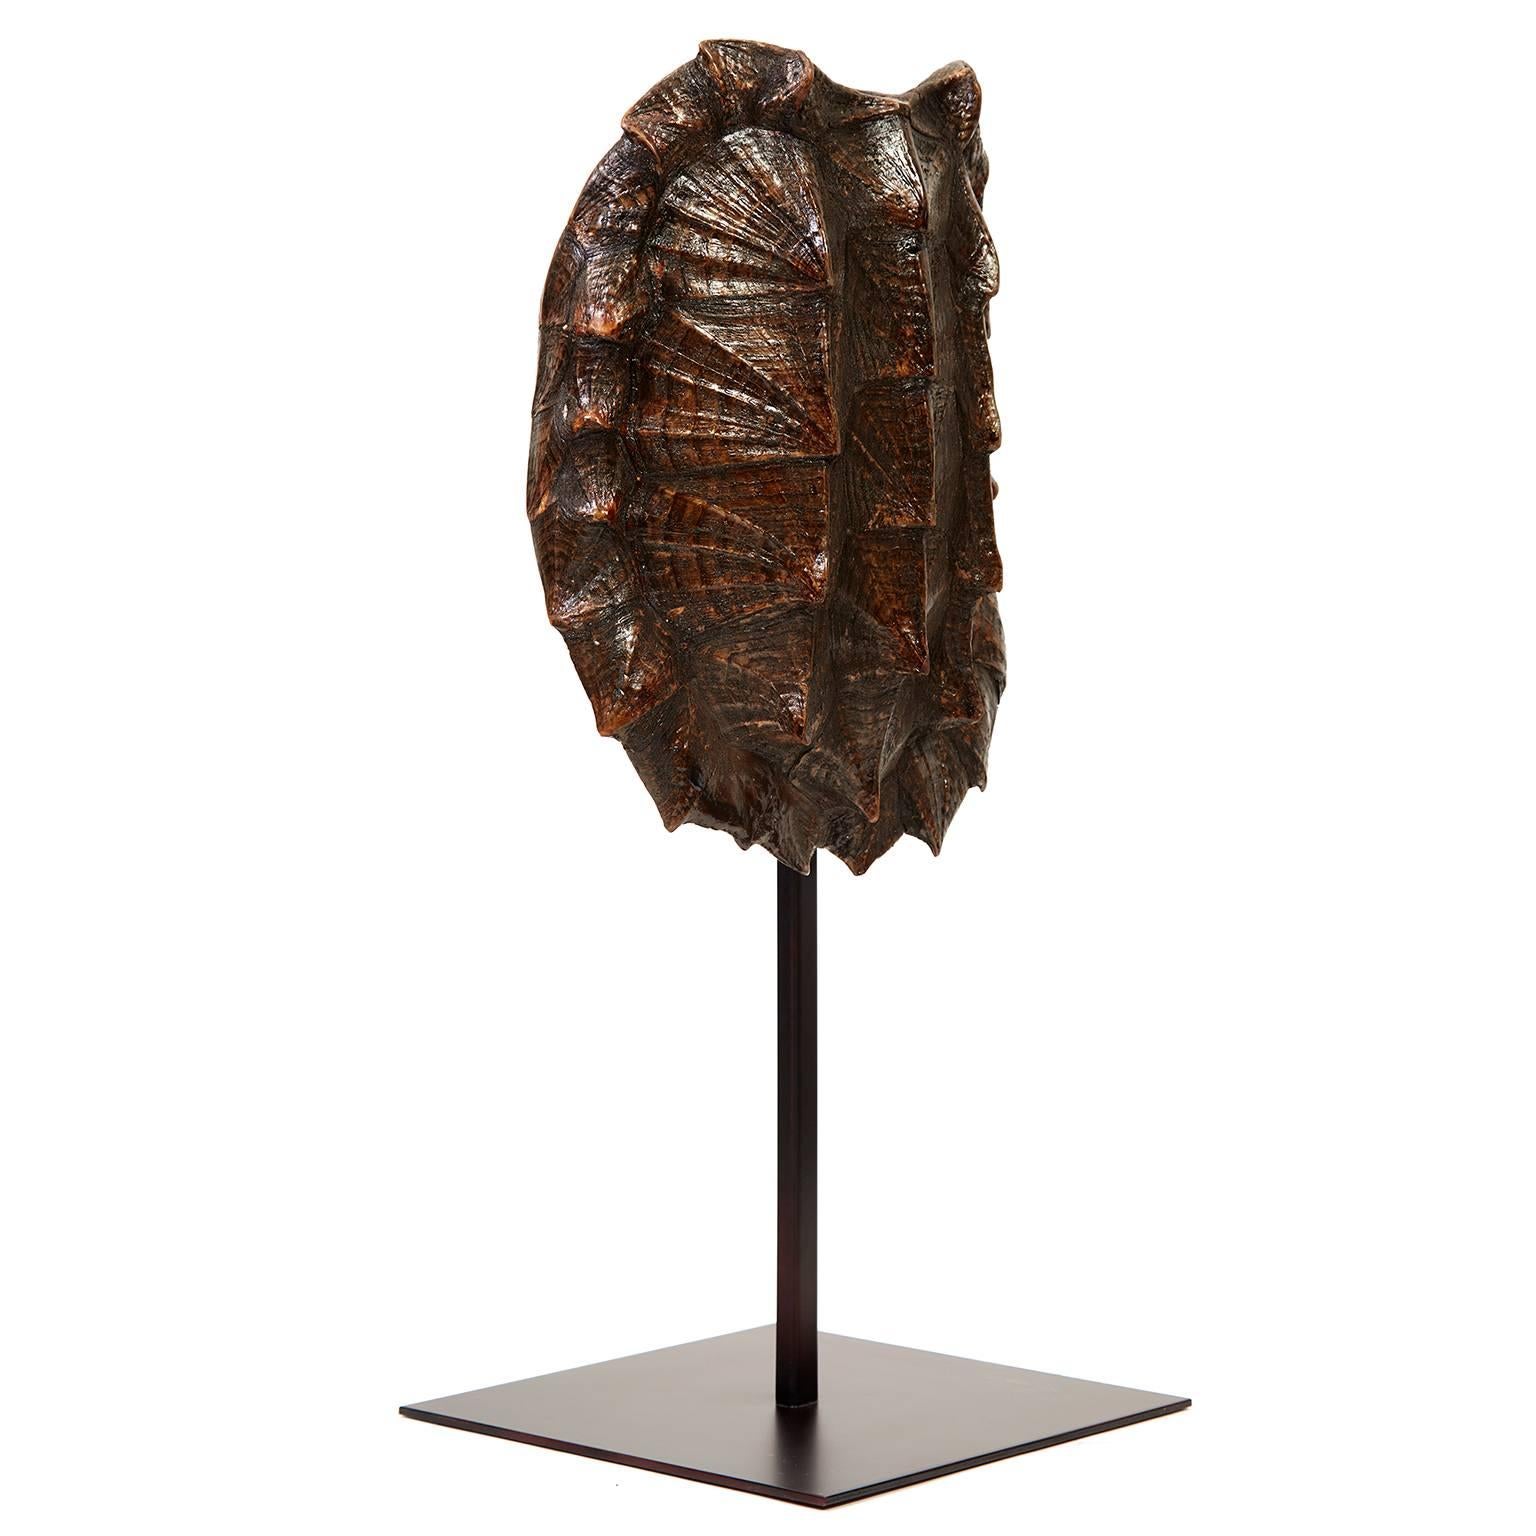 This antique taxidermy shell’s distinct, rough ridges are characteristic of the alligator snapping turtle. The largest freshwater turtle in North America, its shell has three ridges that form a fanned pattern. In excellent condition, the shell